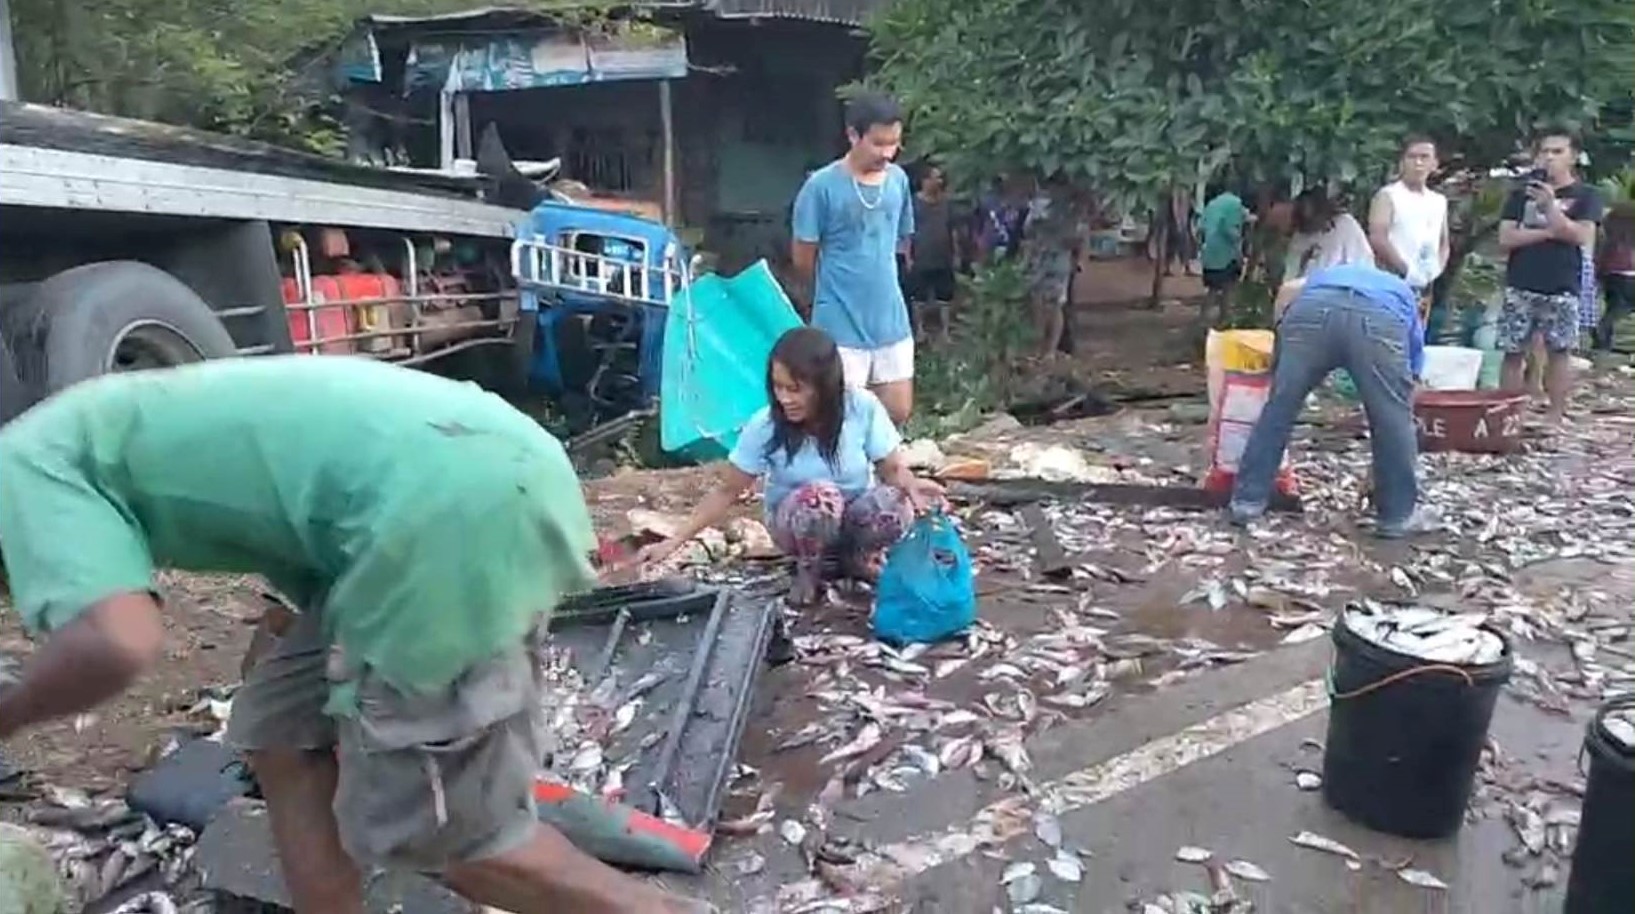 Residents of Barangay Burnay, Gitagum, Misamis Oriental gather fish that scattered on the road after the cargo truck it was loaded into bound for Cagayan de Oro City met an accident on Thursday